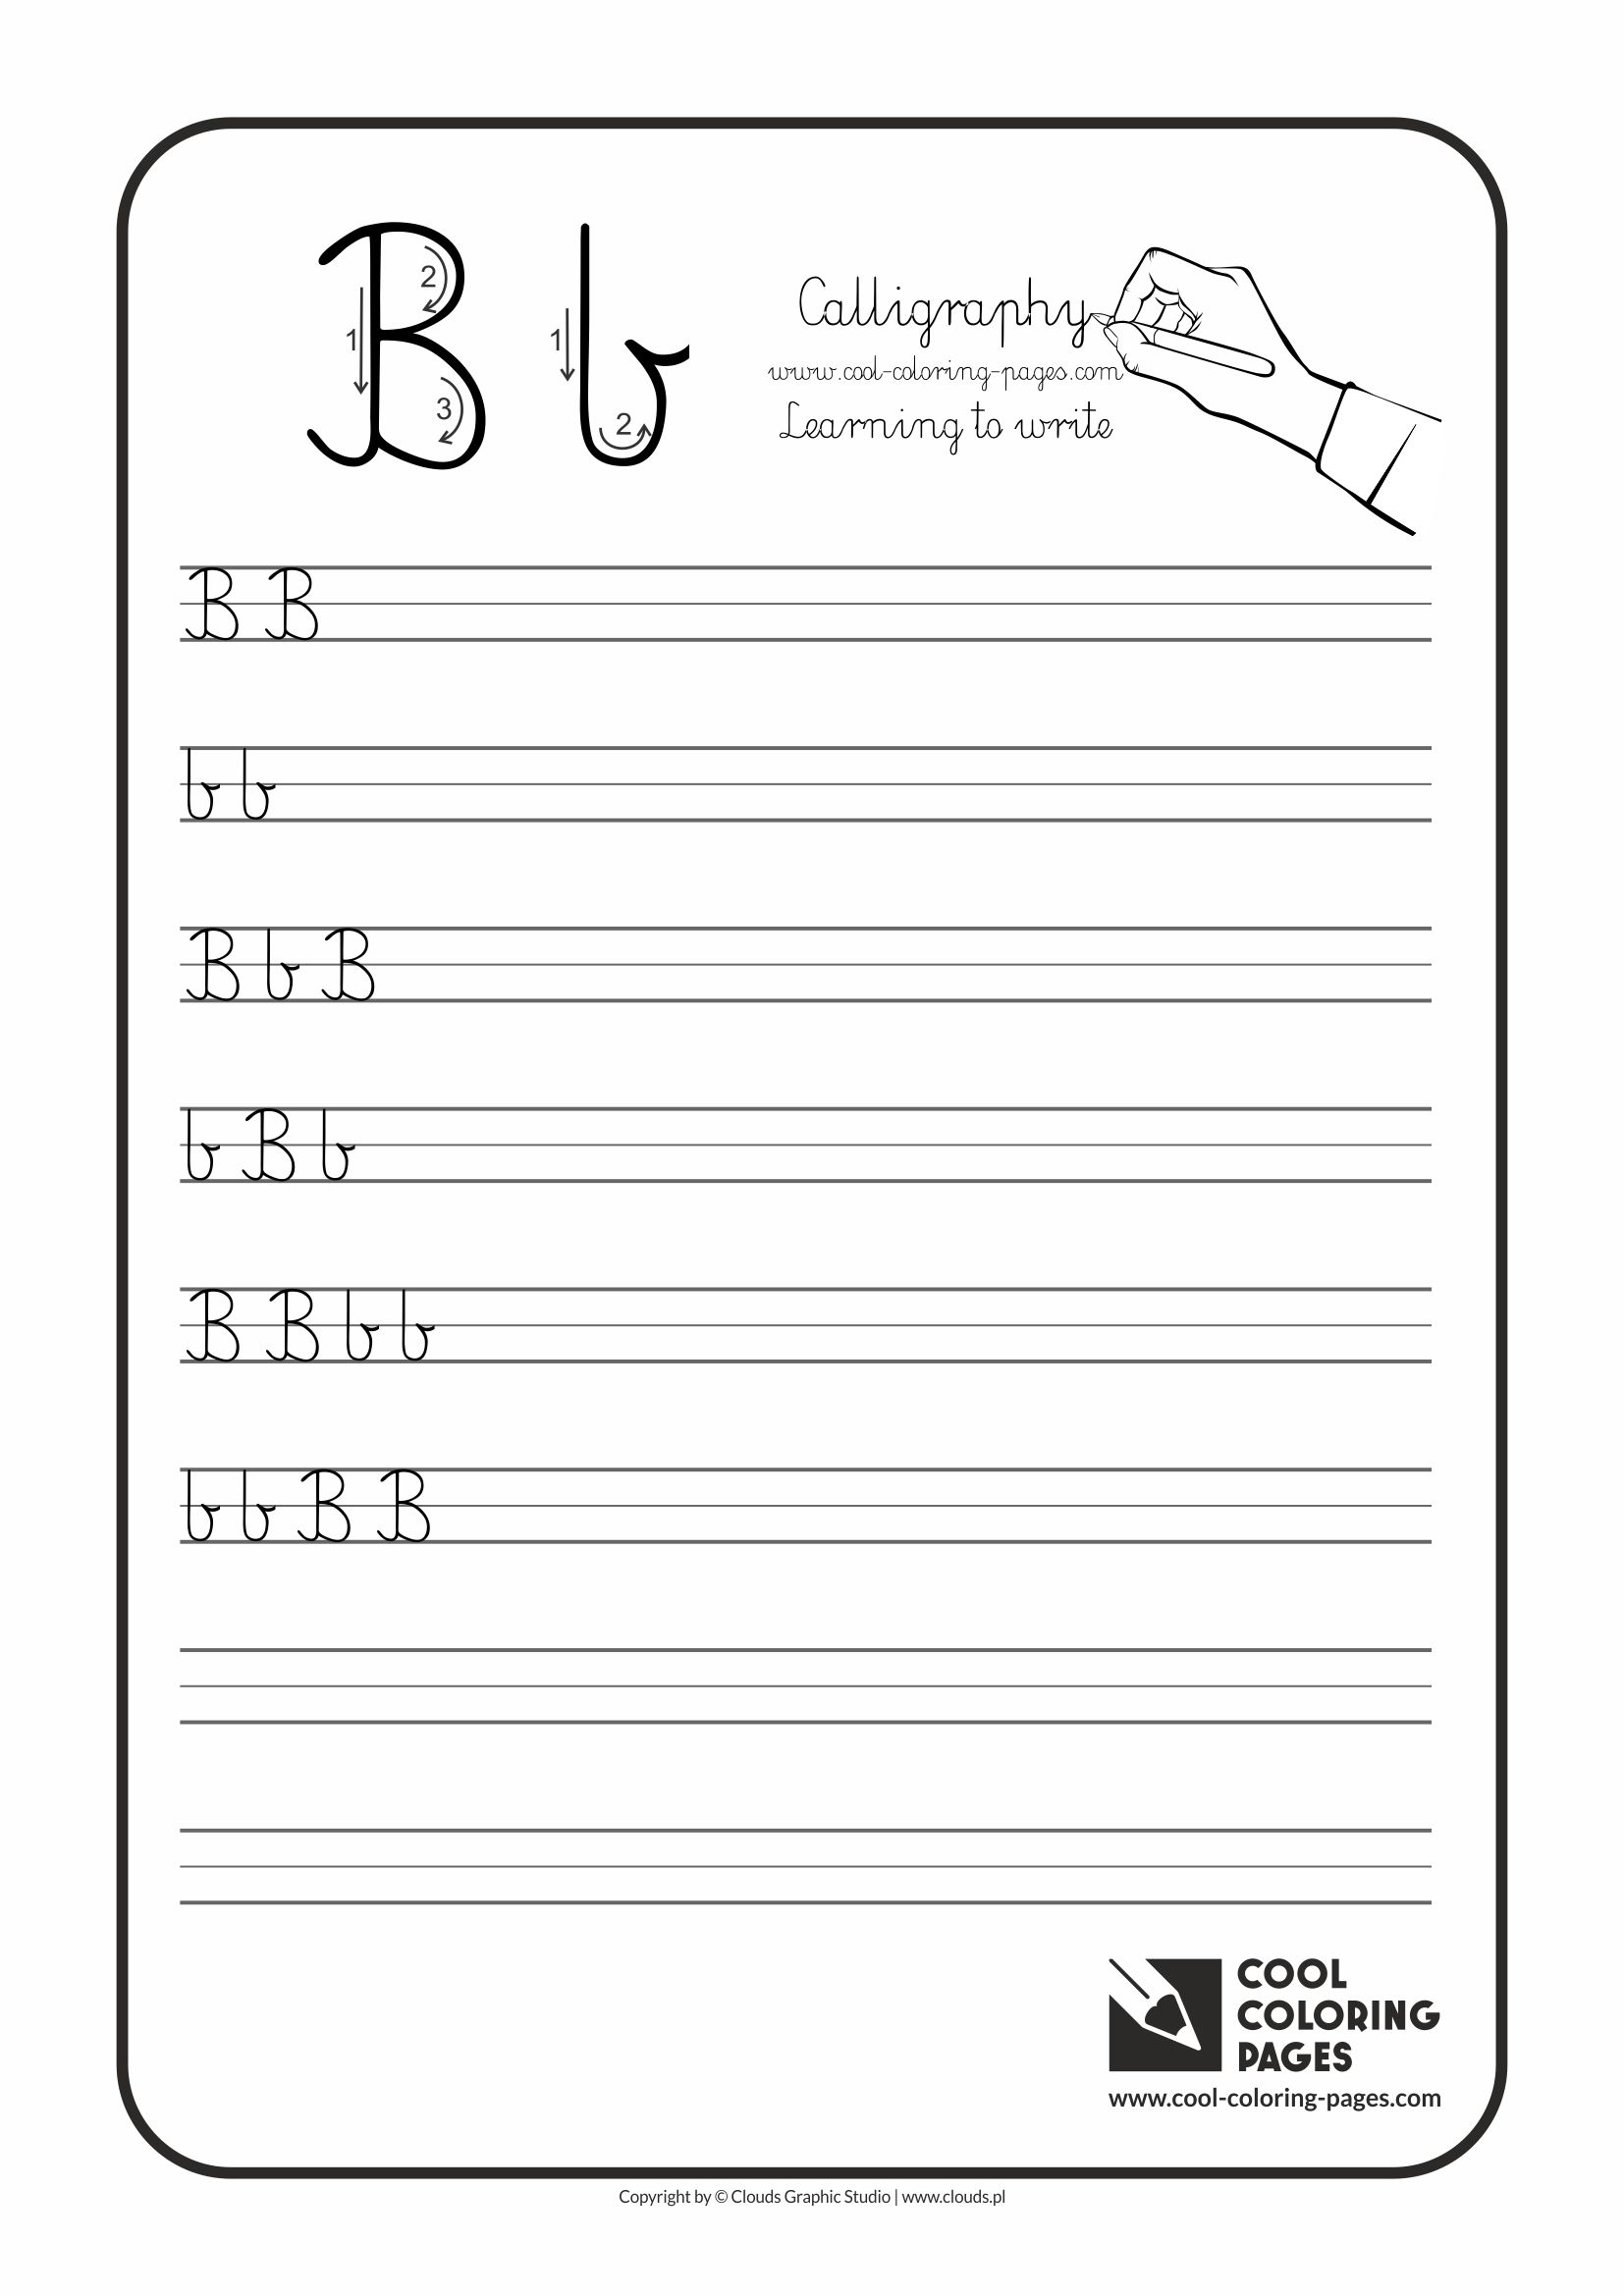 Cool Coloring Pages / Calligraphy / Letter B - Handwriting for kids / Worksheets